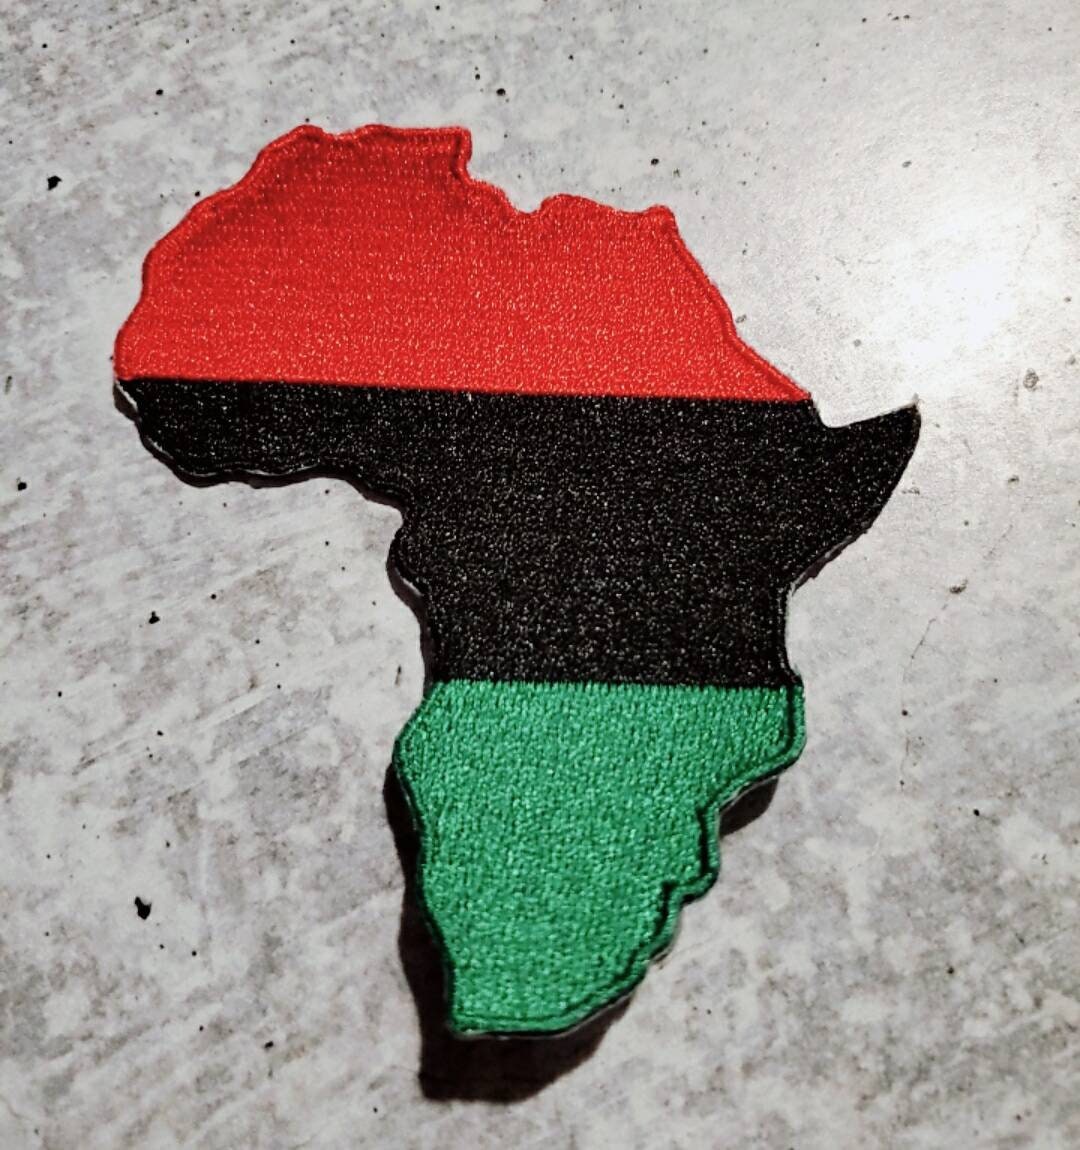 NEW, "Pan-African Flag" Iron-On 100% Embroidered Afrocentric Patch; Juneteenth, Marcus Garvey, Unia Flag, Red, Green, and Black, 3.5" Length